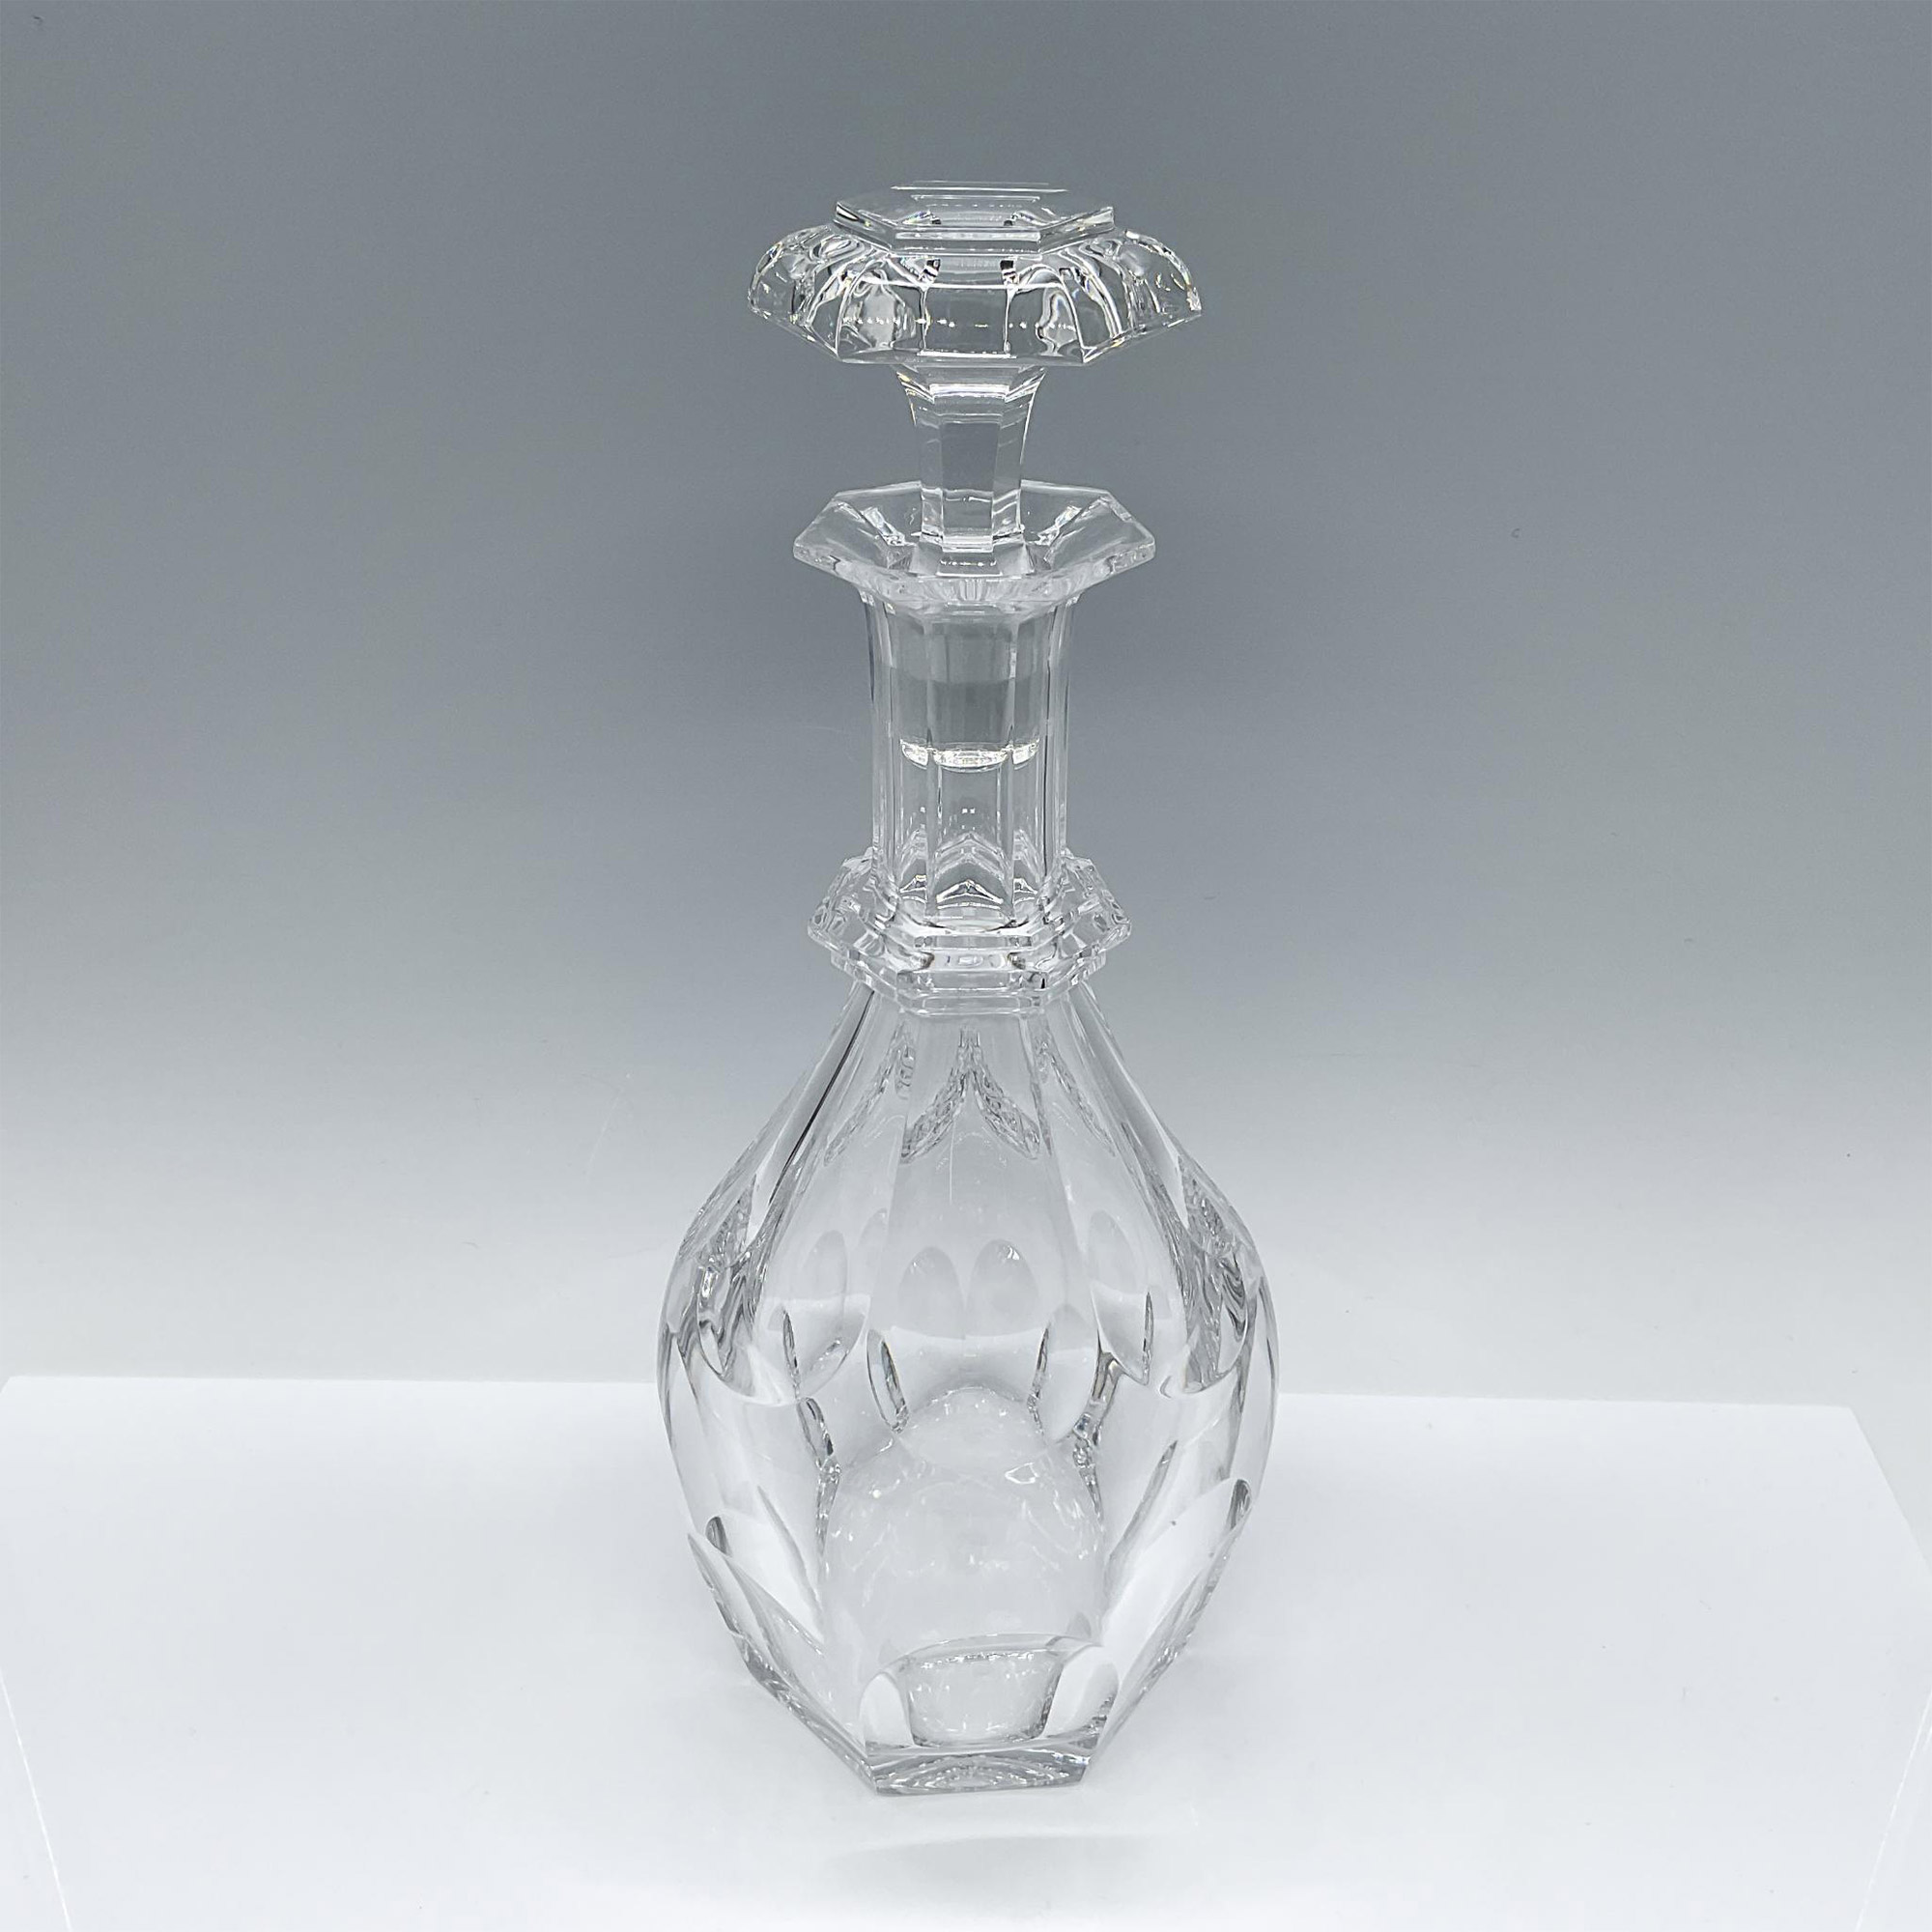 Baccarat Harcourt-Versailles Decanter and Stopper - Image 2 of 3